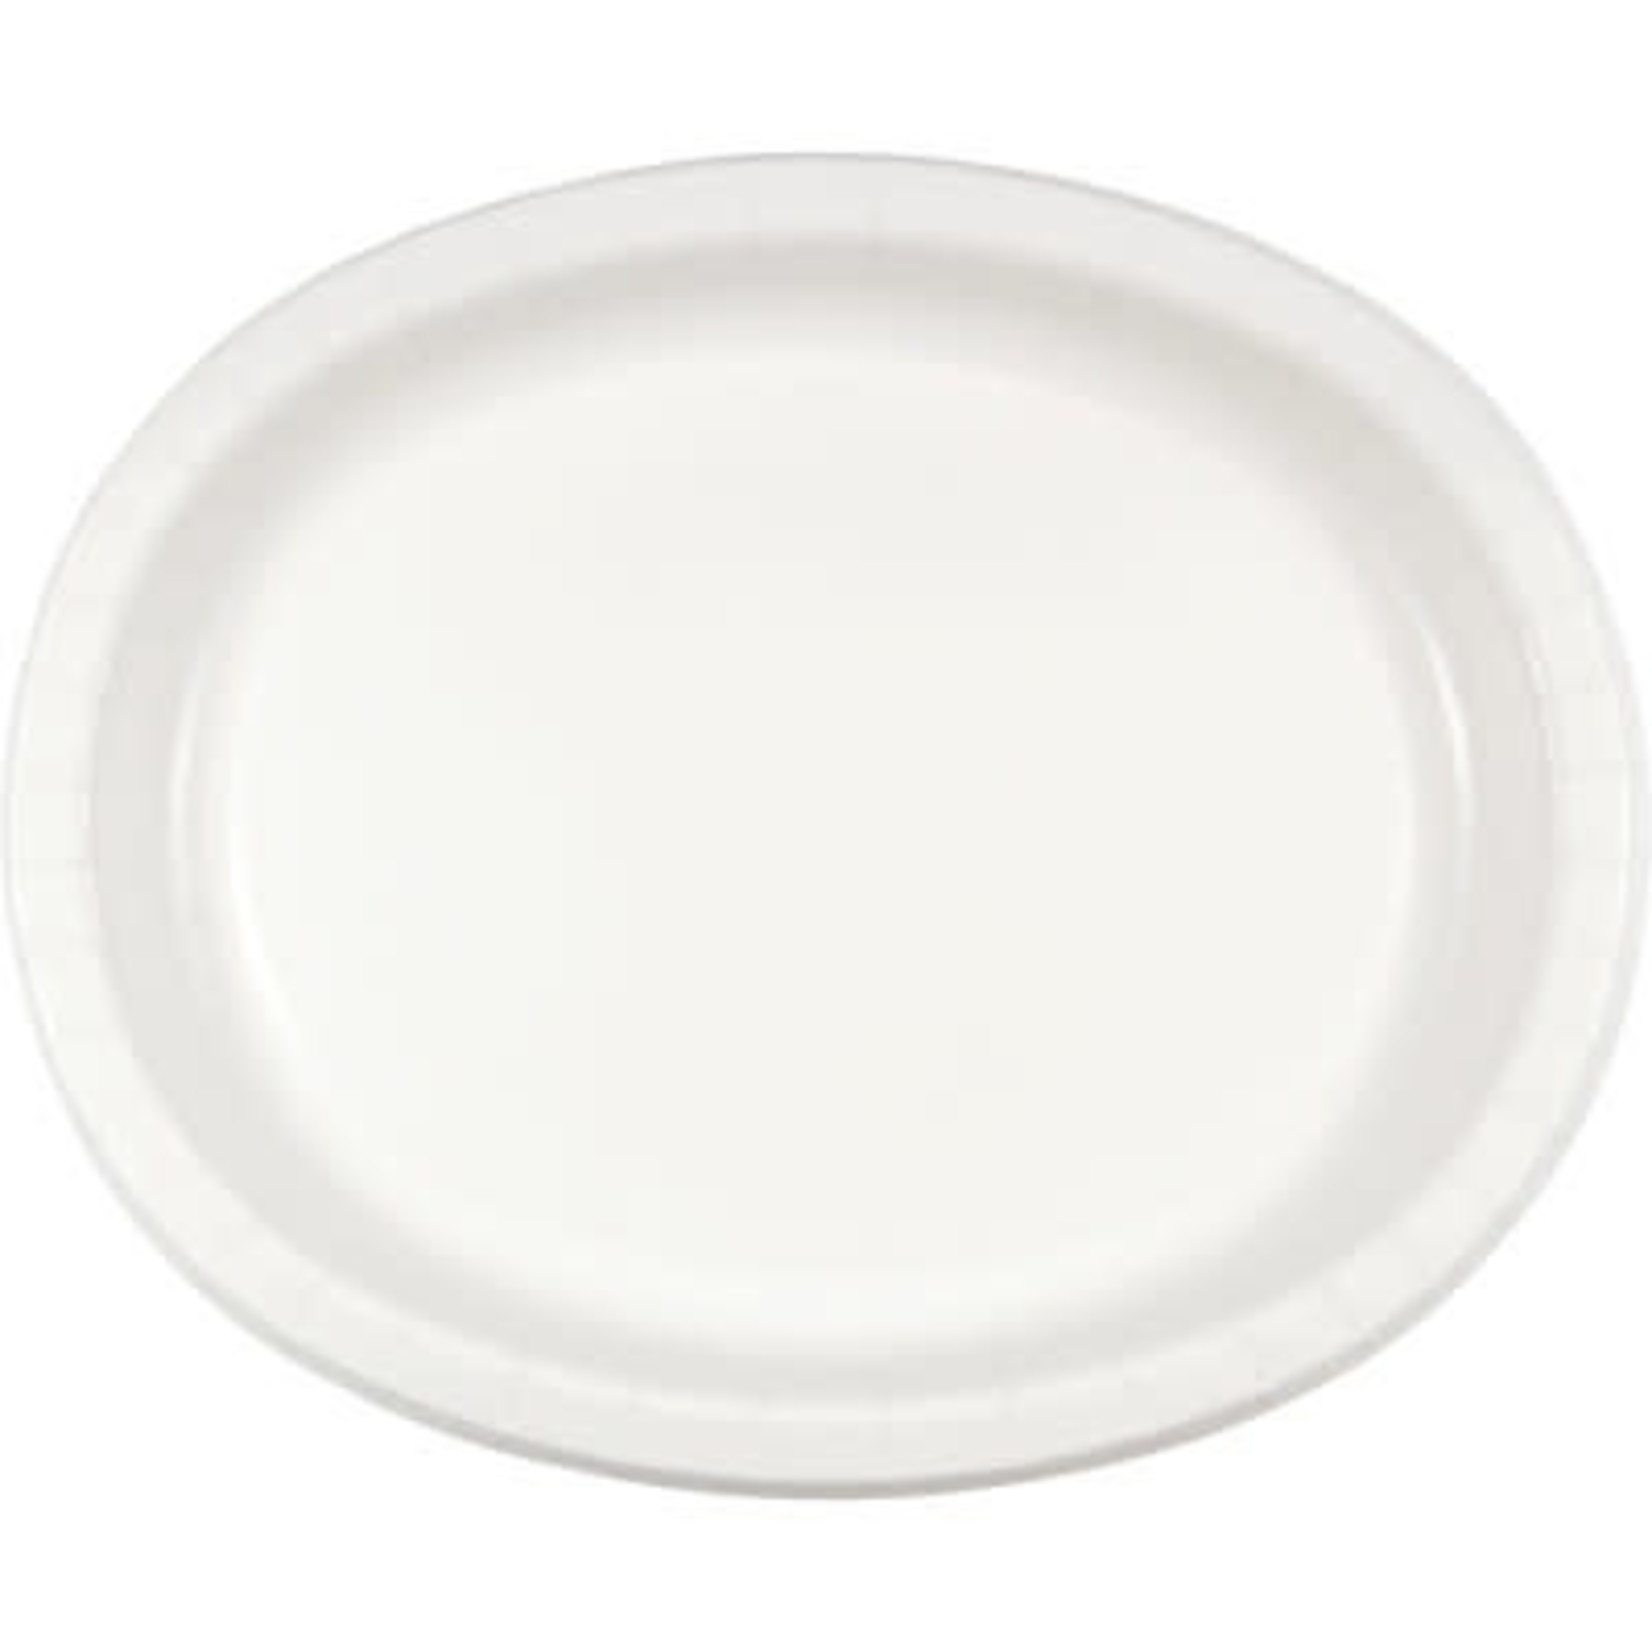 TOC 10" x 12" White Oval Paper Plates - 8ct.